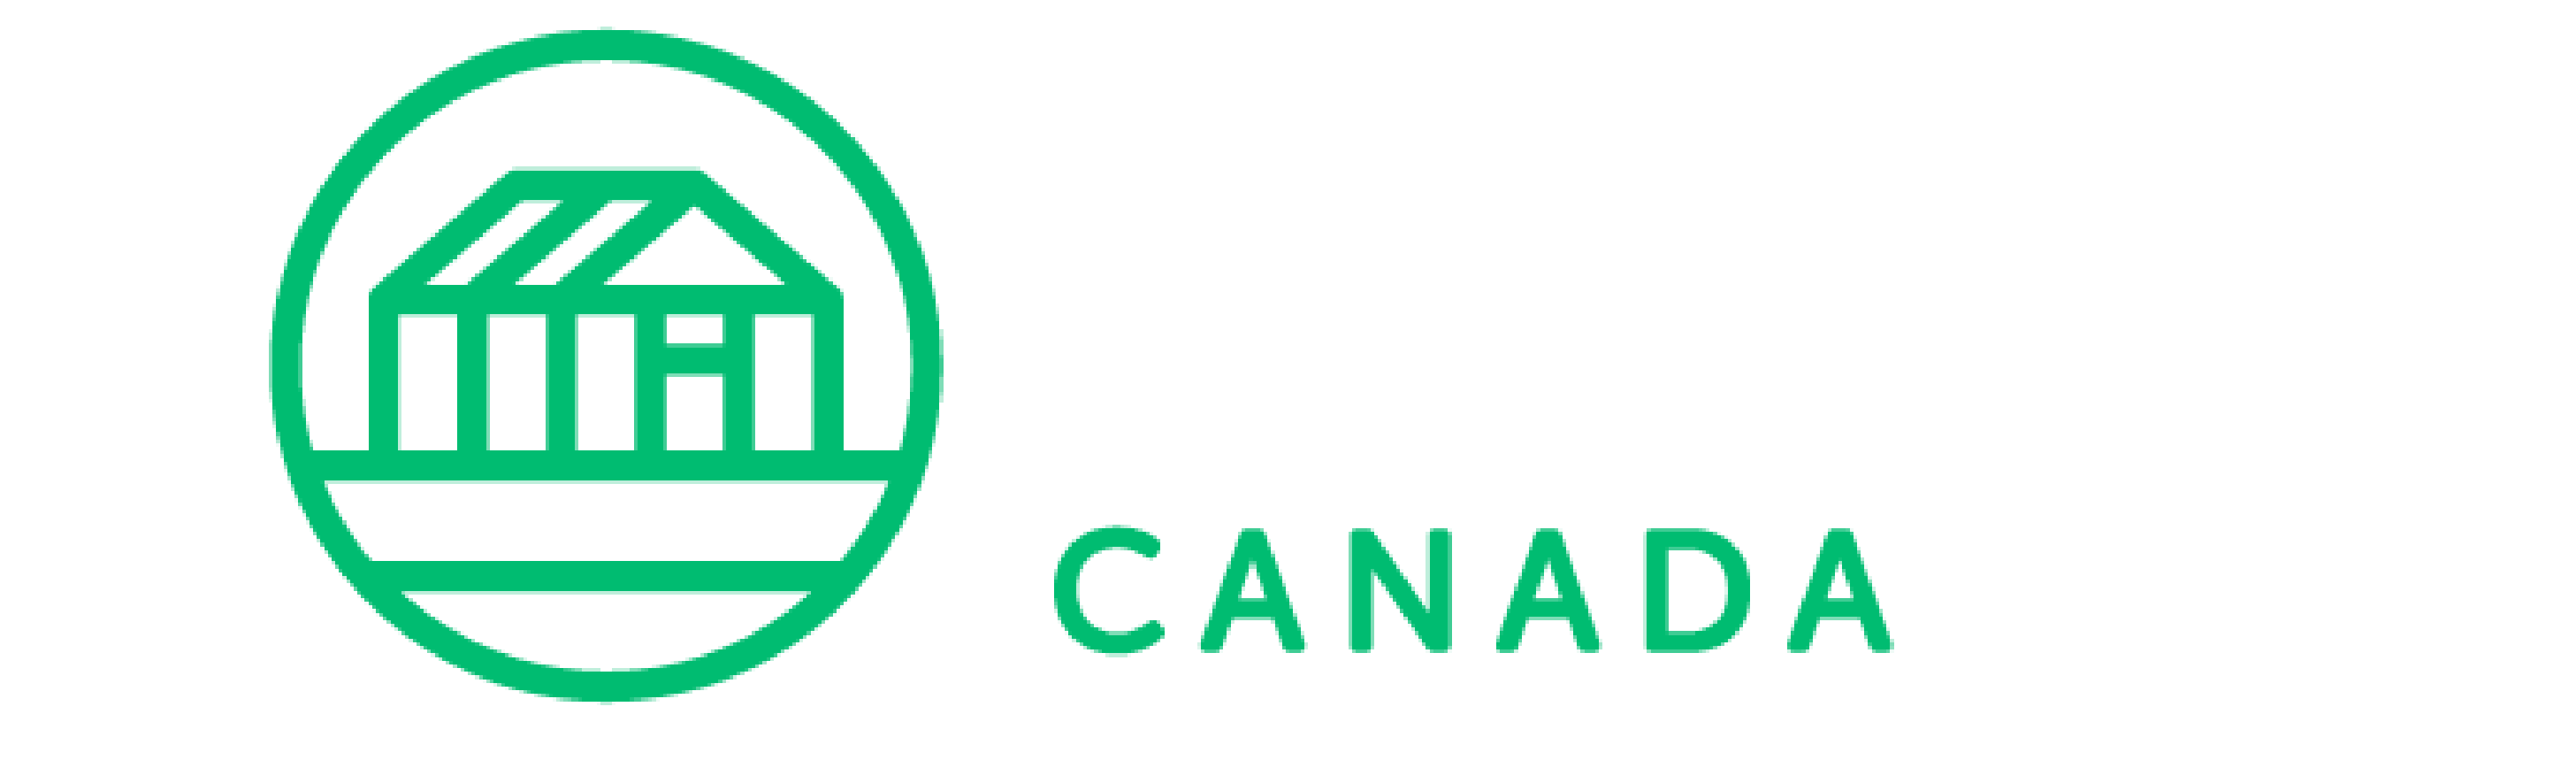 ReFeed Canada 